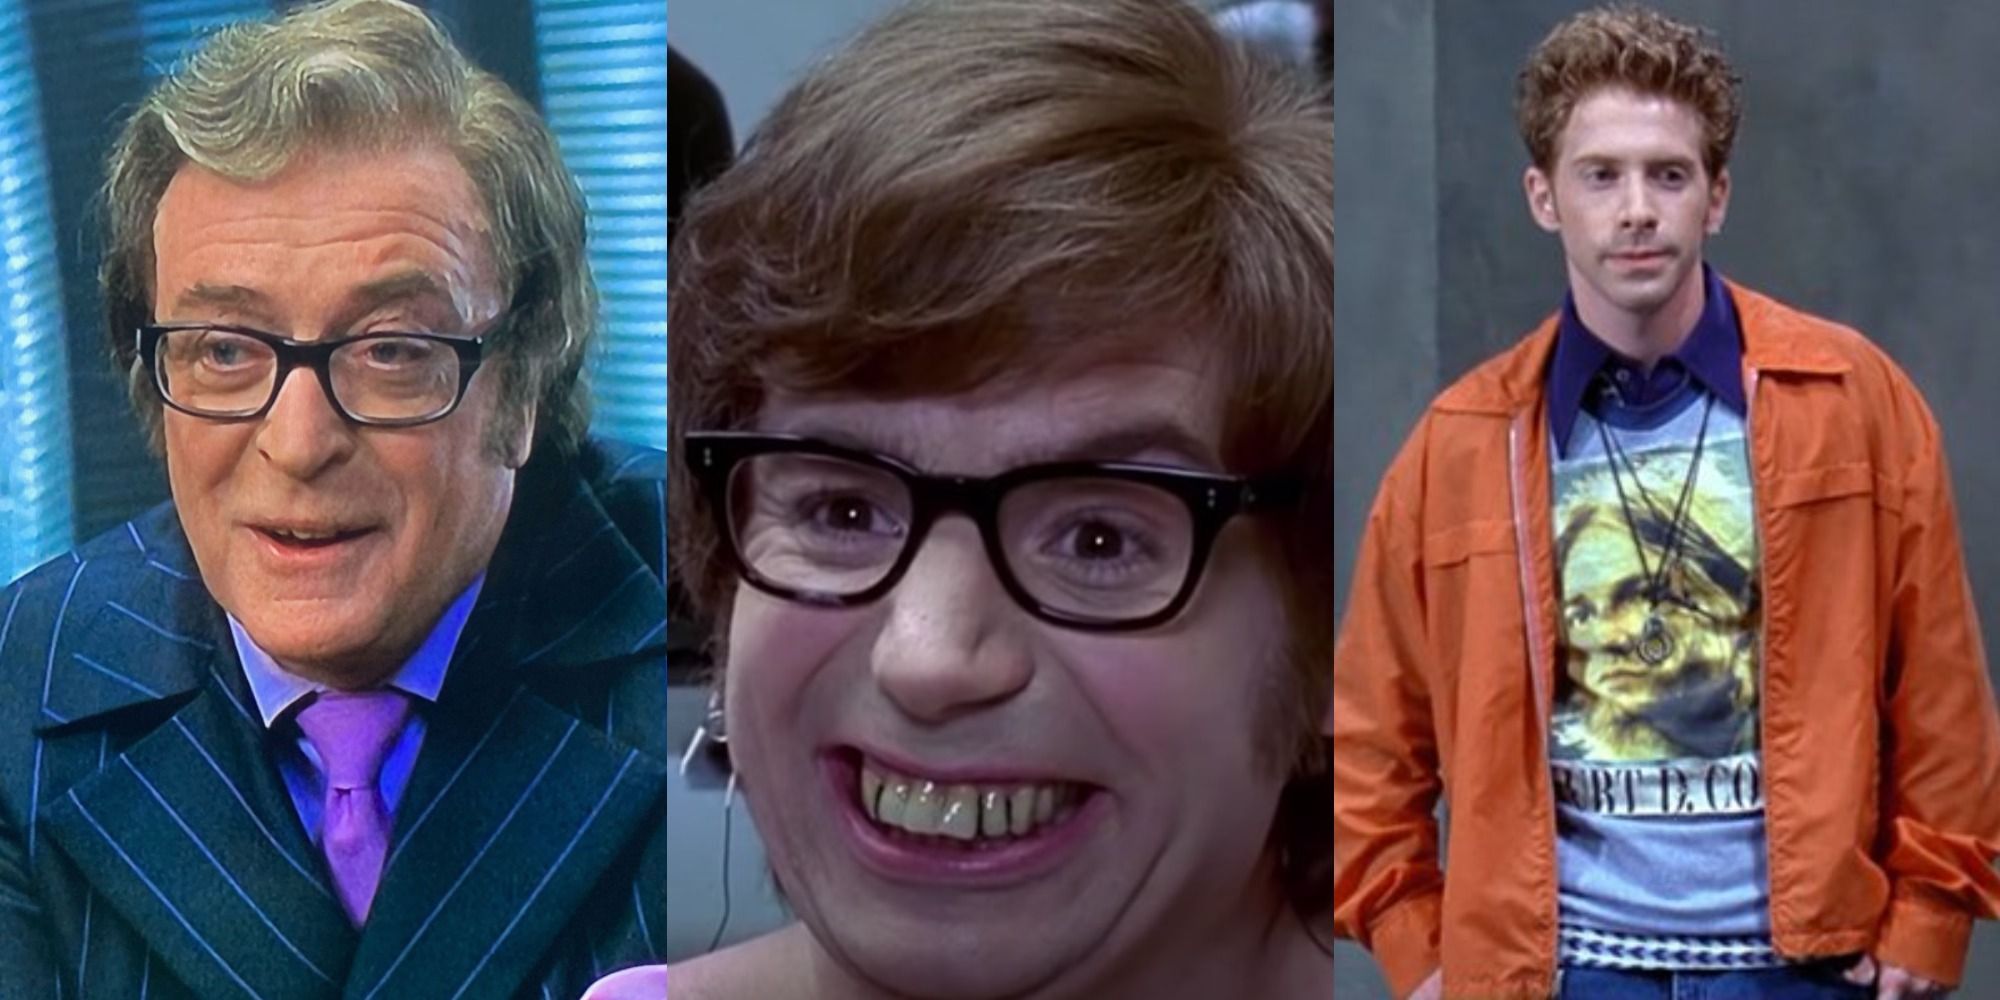 Three side by side images of characters from Austin Powers